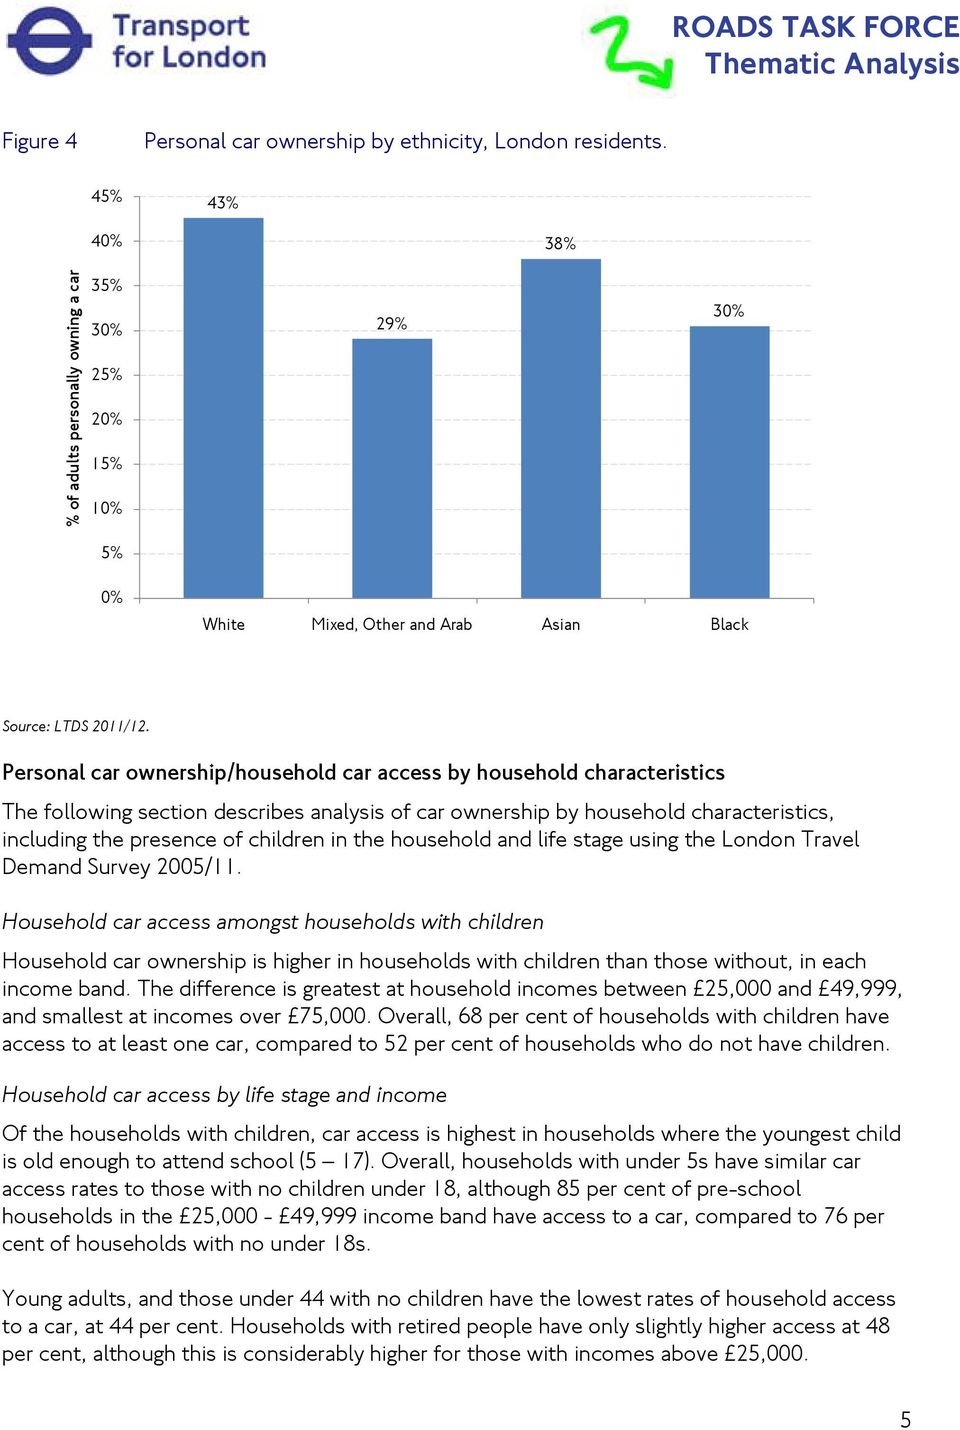 section describes analysis of car ownership by household characteristics, including the presence of children in the household and life stage using the London Travel Demand Survey 2005/11.